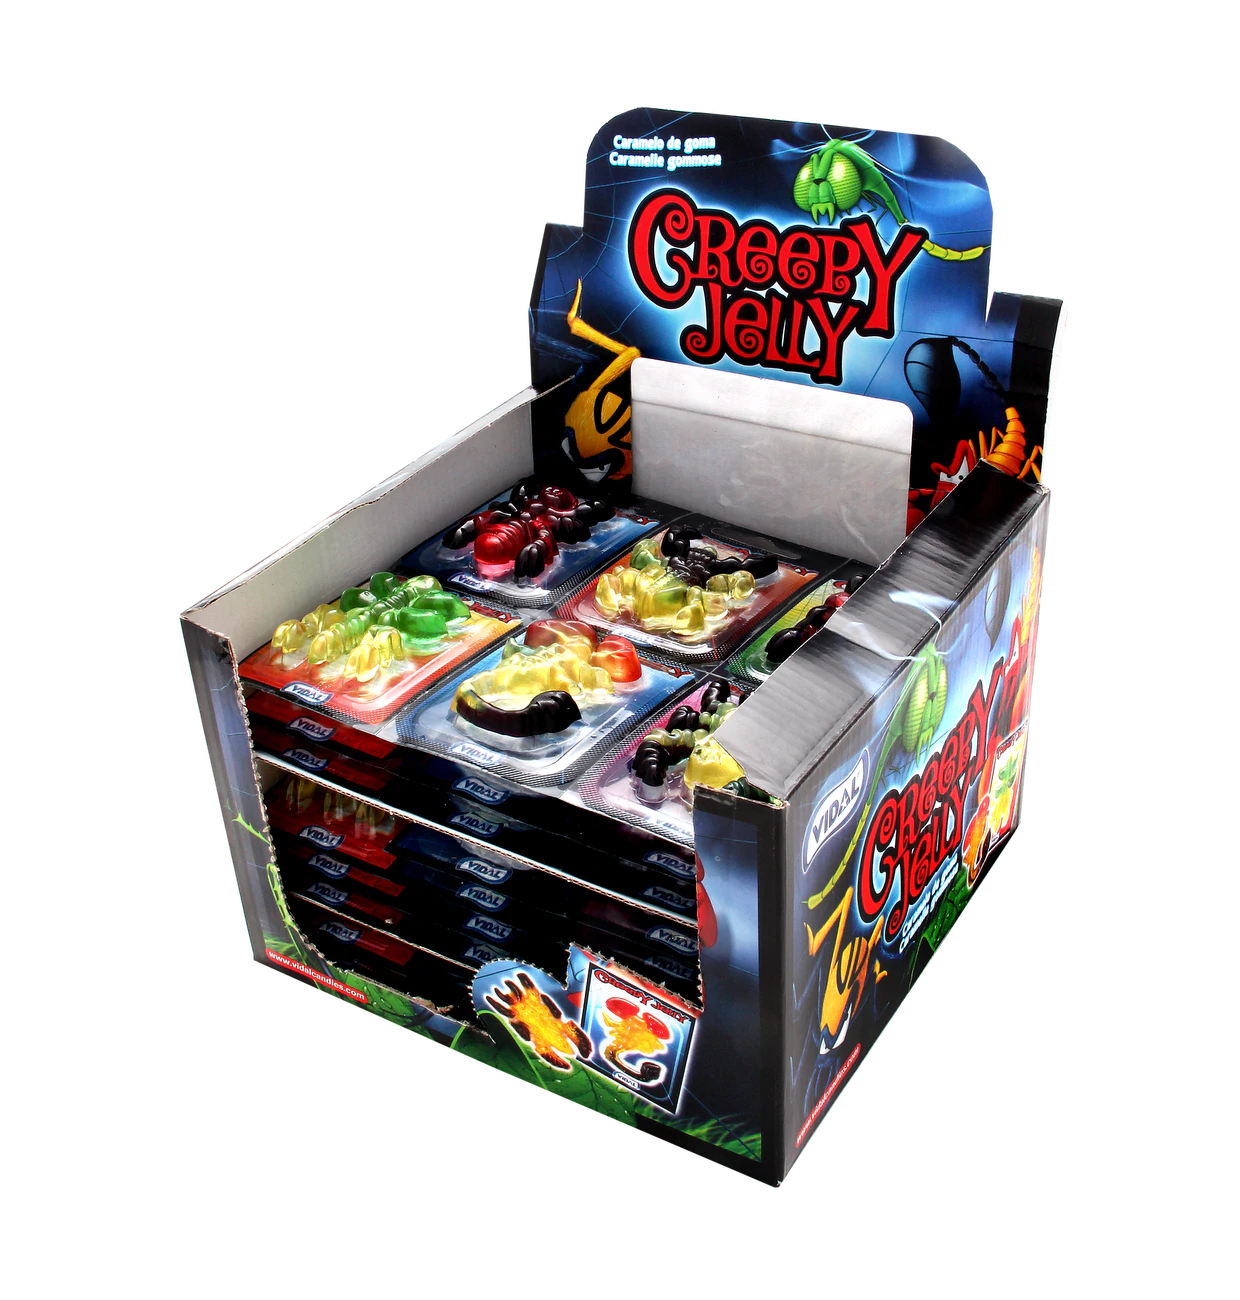 Creepy Jelly fruit gum insects 6-pack (11 x 11g)